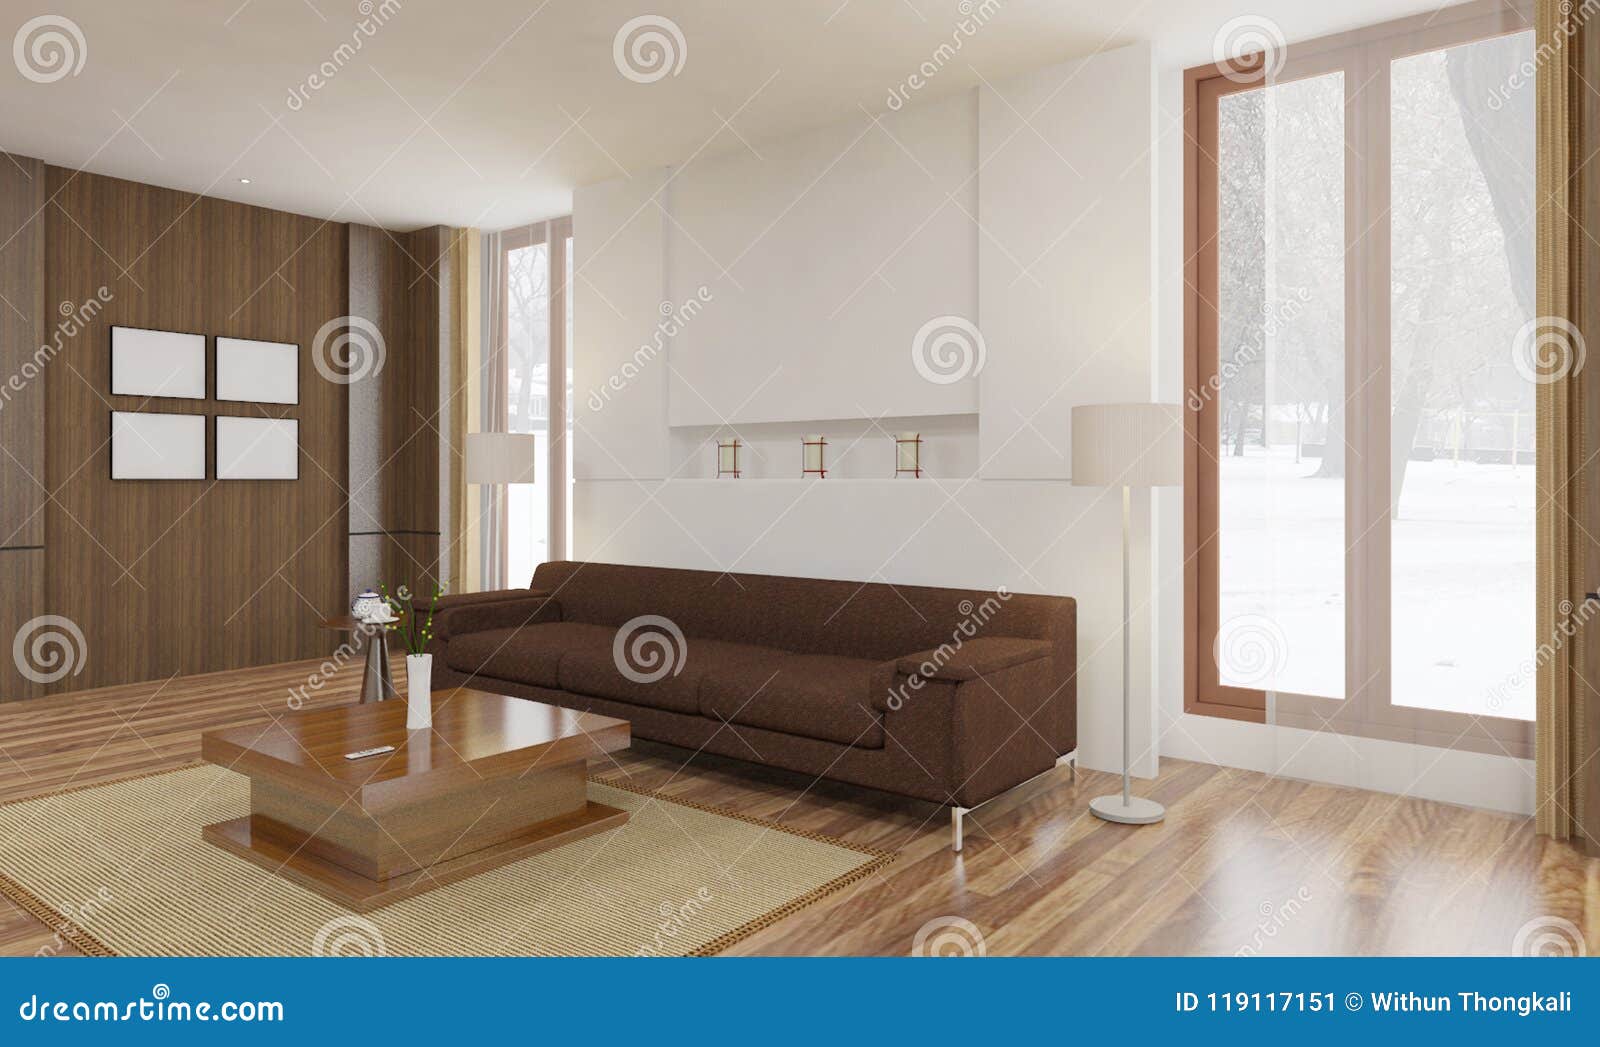 Minimalist And Scandinavian Style With Cozy Living Room Interior And 3d Render Stock Illustration Illustration Of Interior Light 119117151,Small House Modern House Design 2020 Philippines